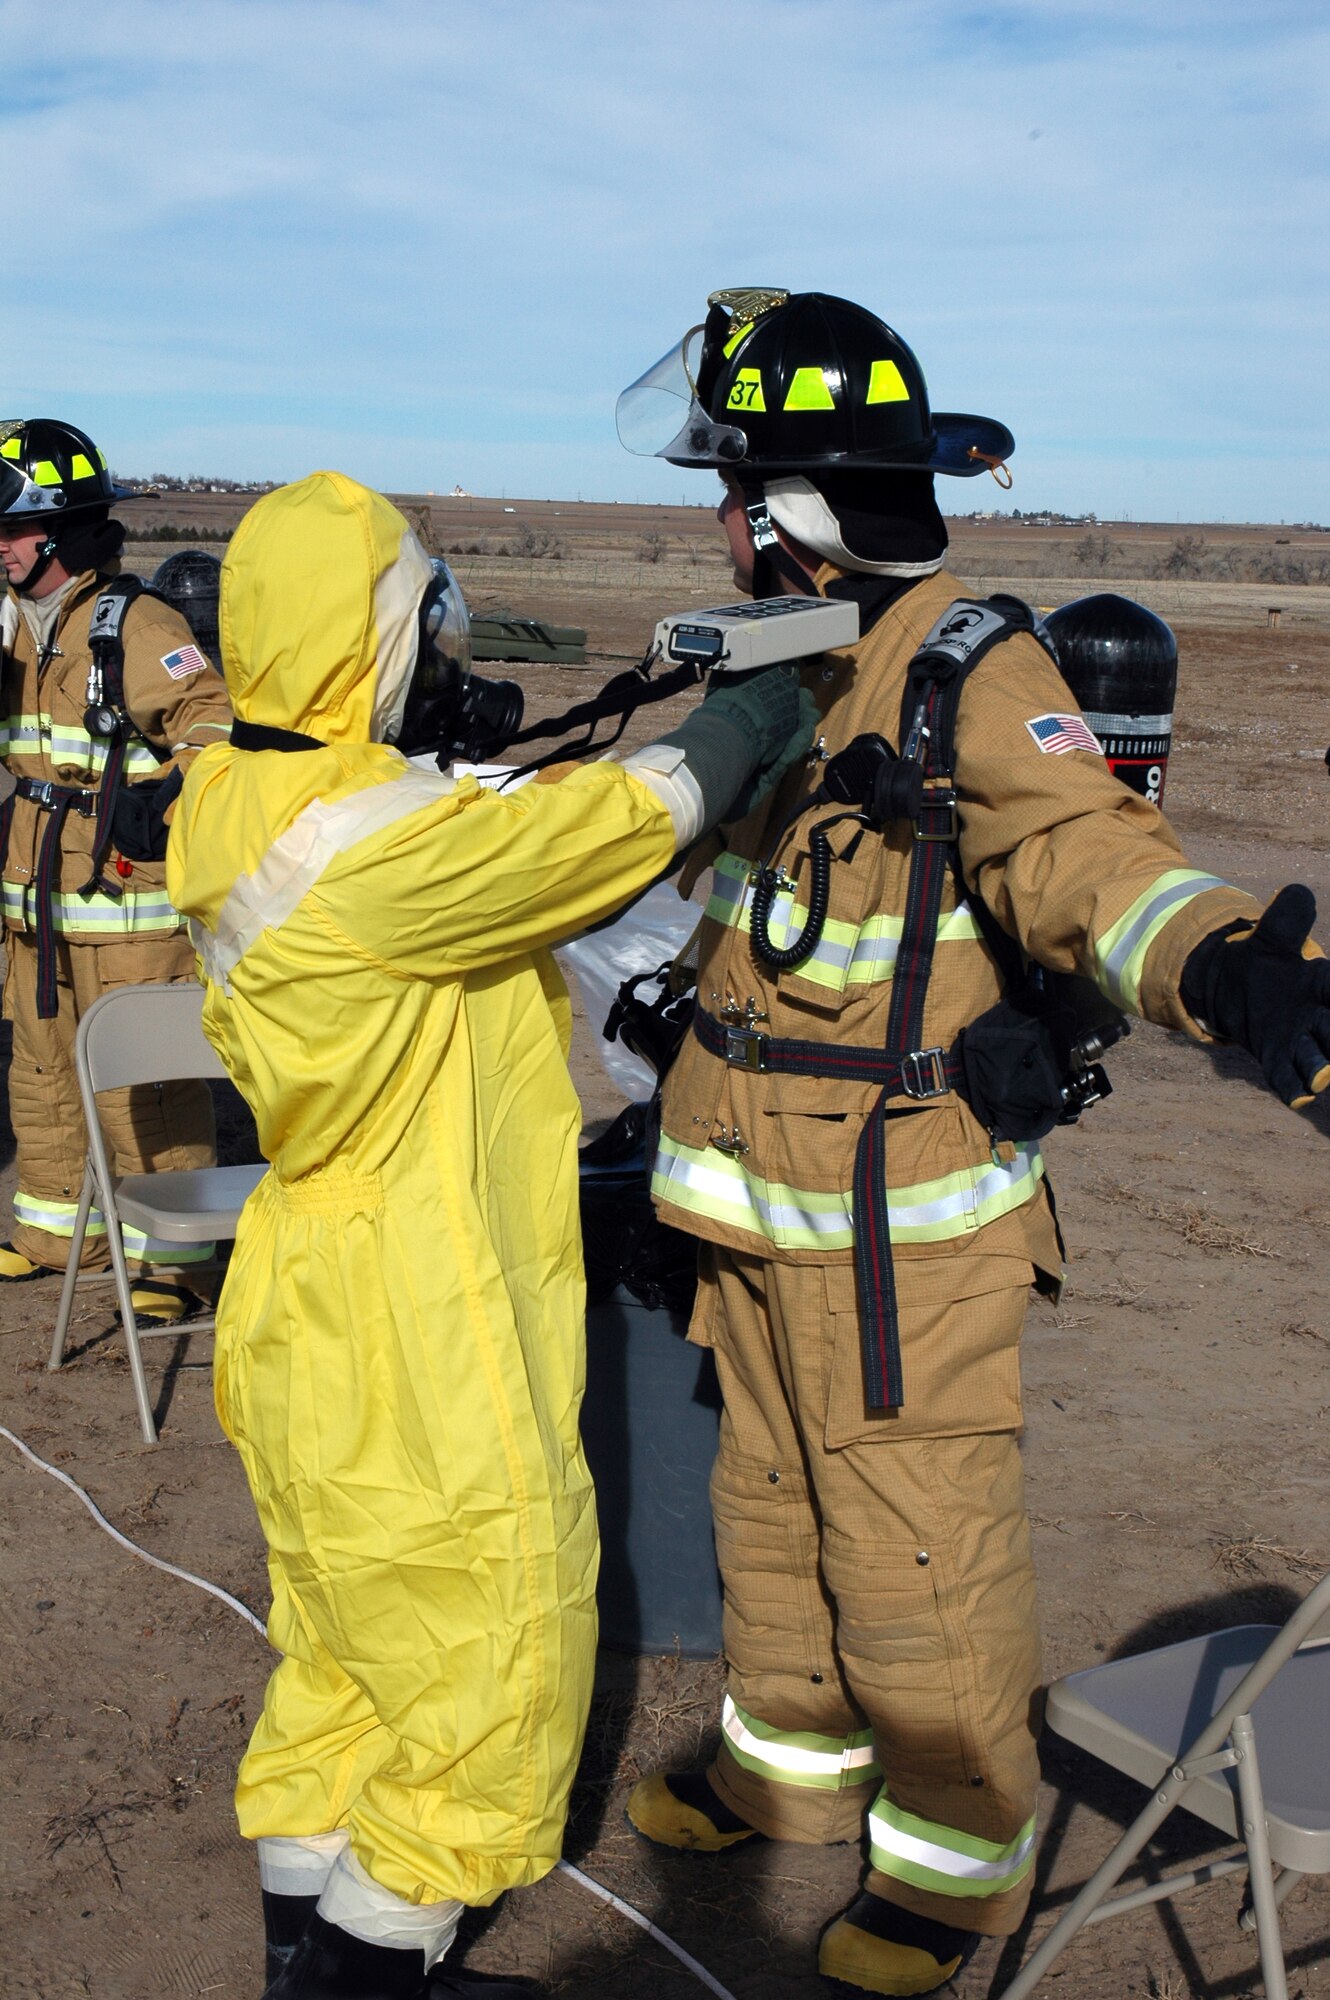 BUCKLEY AIR FORCE BASE, Colo. -- Airman 1st Class R.J. Cockrell, 460th Civil Engineer Squadron Emergency Management Flight, checks the fire suit of Mr. Chris DeBaca, 460th CES Fire Protection Flight, for alpha radiation at the decontamination point during an exercise here Nov. 7. Members of the 460th Civil Engineer Squadron Emergency Management Flight, 460th Medical Group Bioenvironmental Flight and 460th CES Fire Protection Flight exercised their ability to move people from a contaminated area into an uncontaminated area through a decontamination line. (U.S. Air Force photo by Staff Sgt. Sanjay Allen)